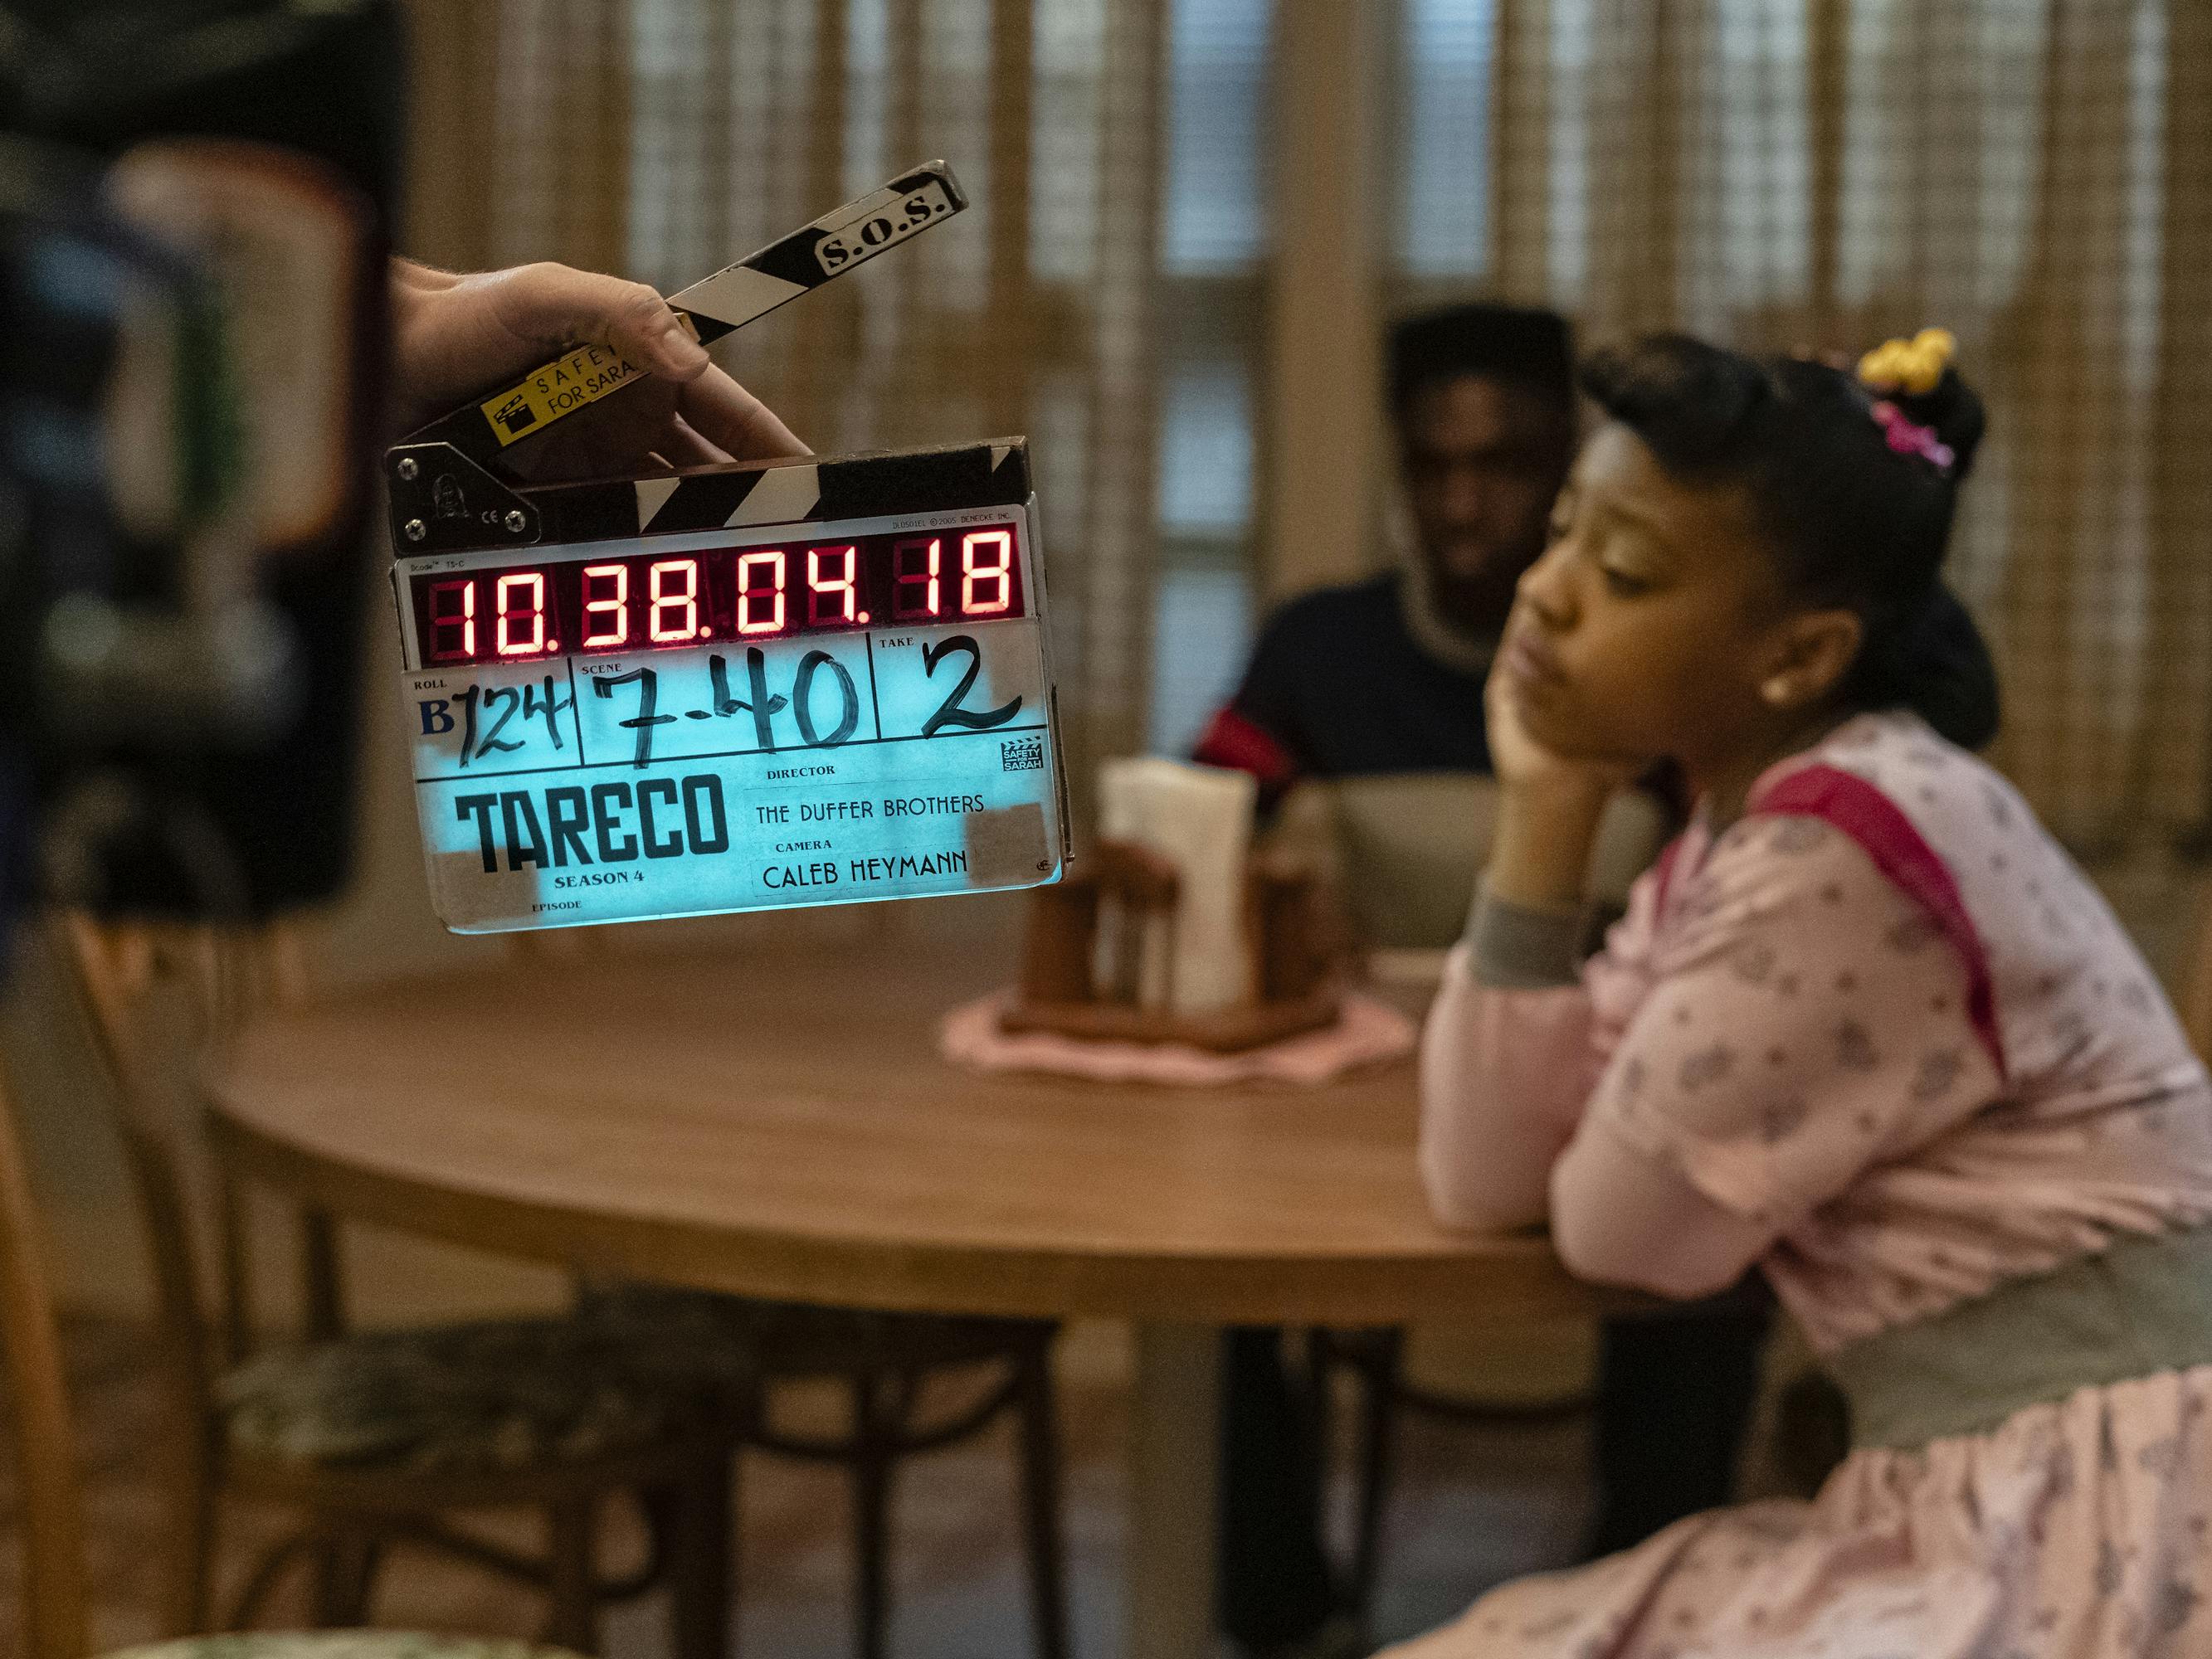 Erica Sinclair (Priah Ferguson) wears a pink dress and rests her chin in her palm on a wood table.